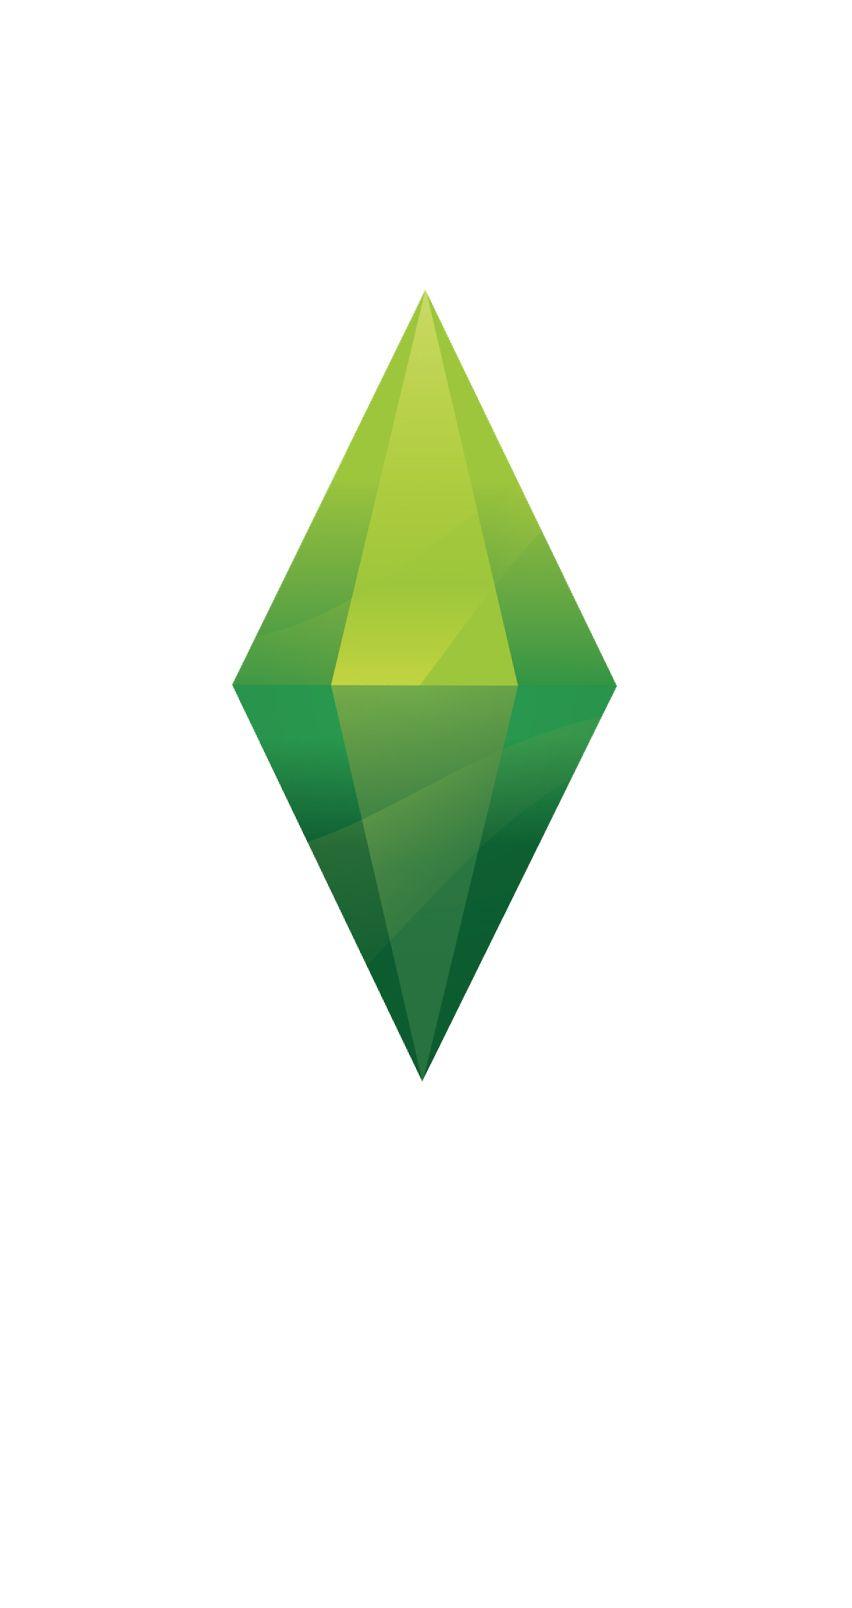 Plumbob #thesims #iPhone 4 5 6 #Wallpaper Check Out More